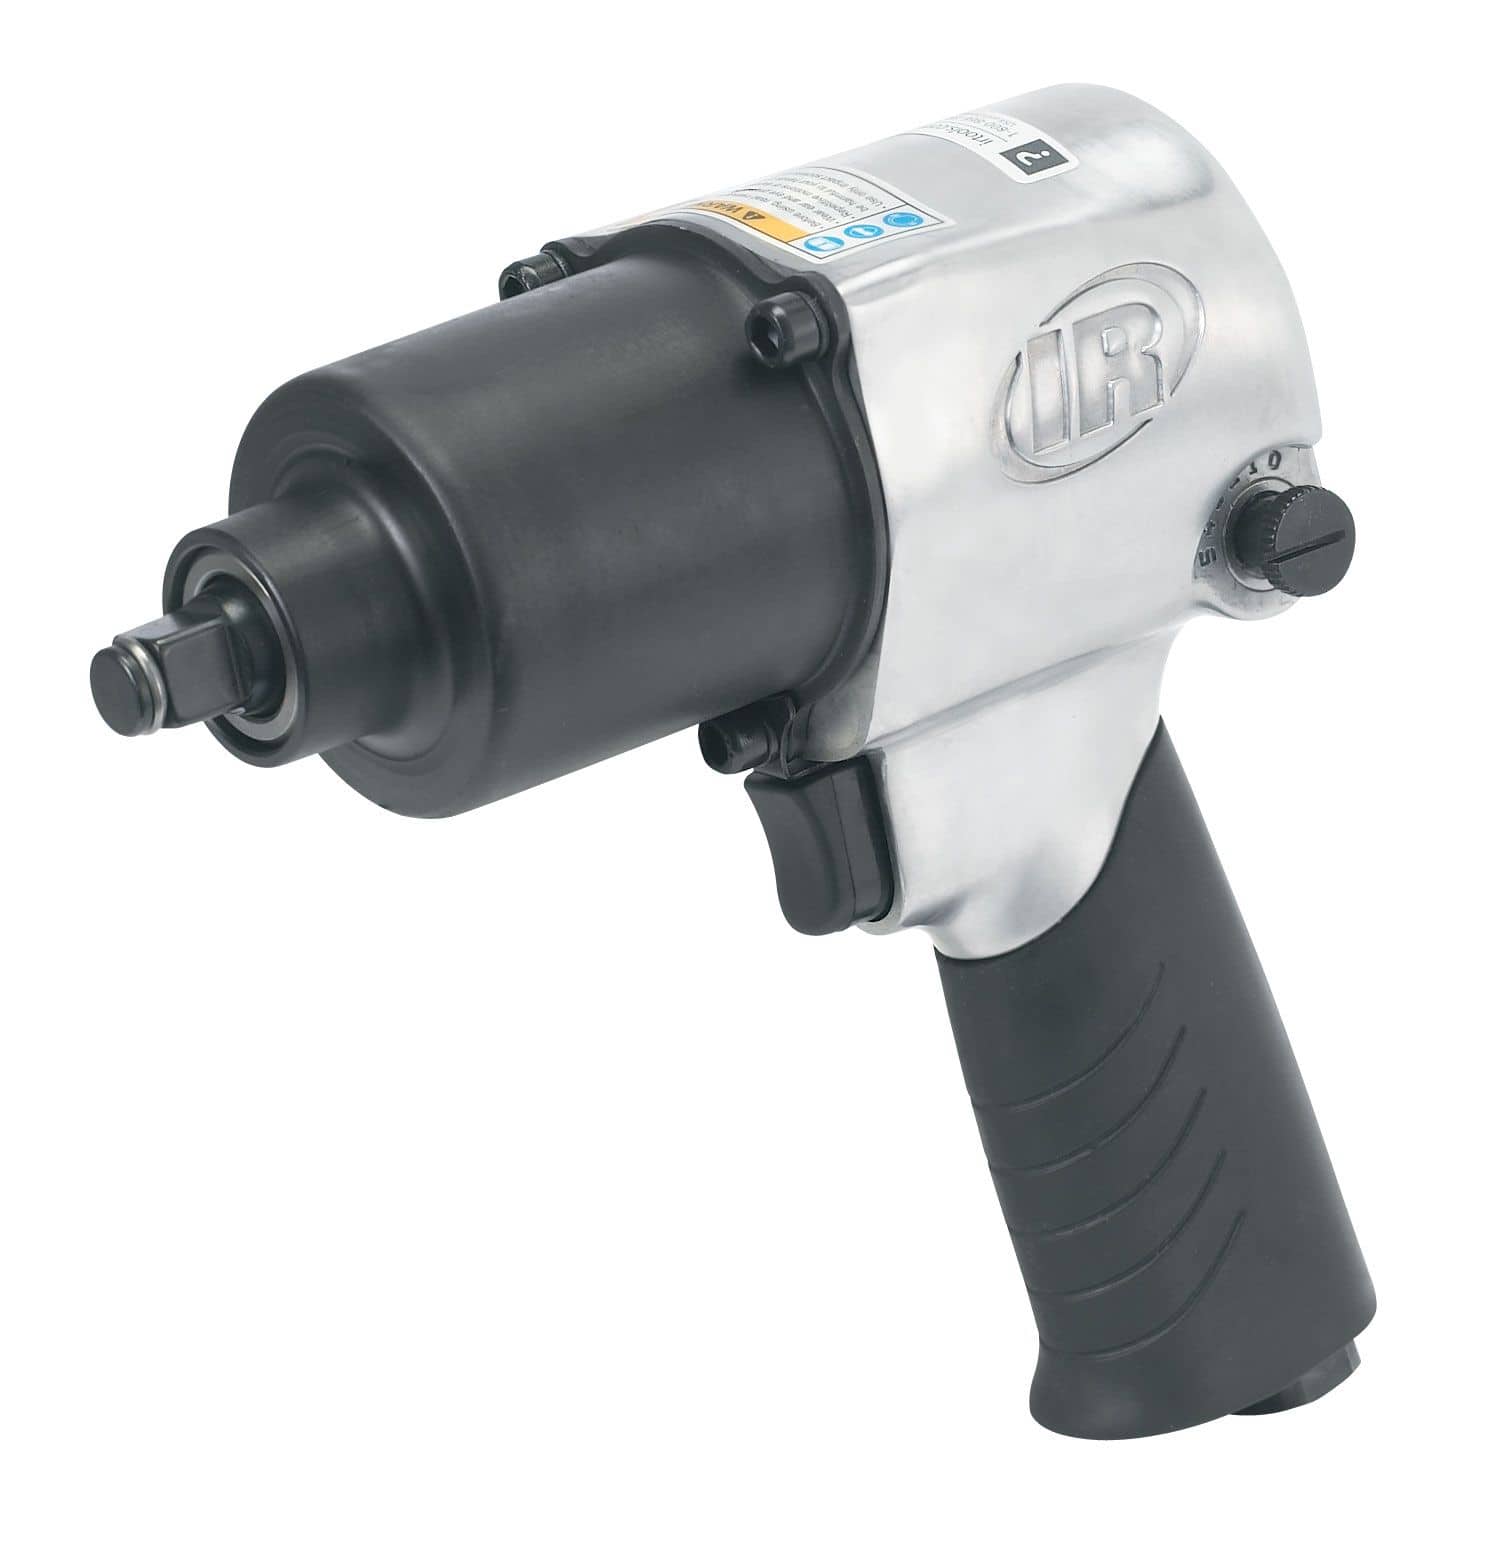 Ingersoll Rand 1/2-in Air Impact Wrench | Canadian Tire